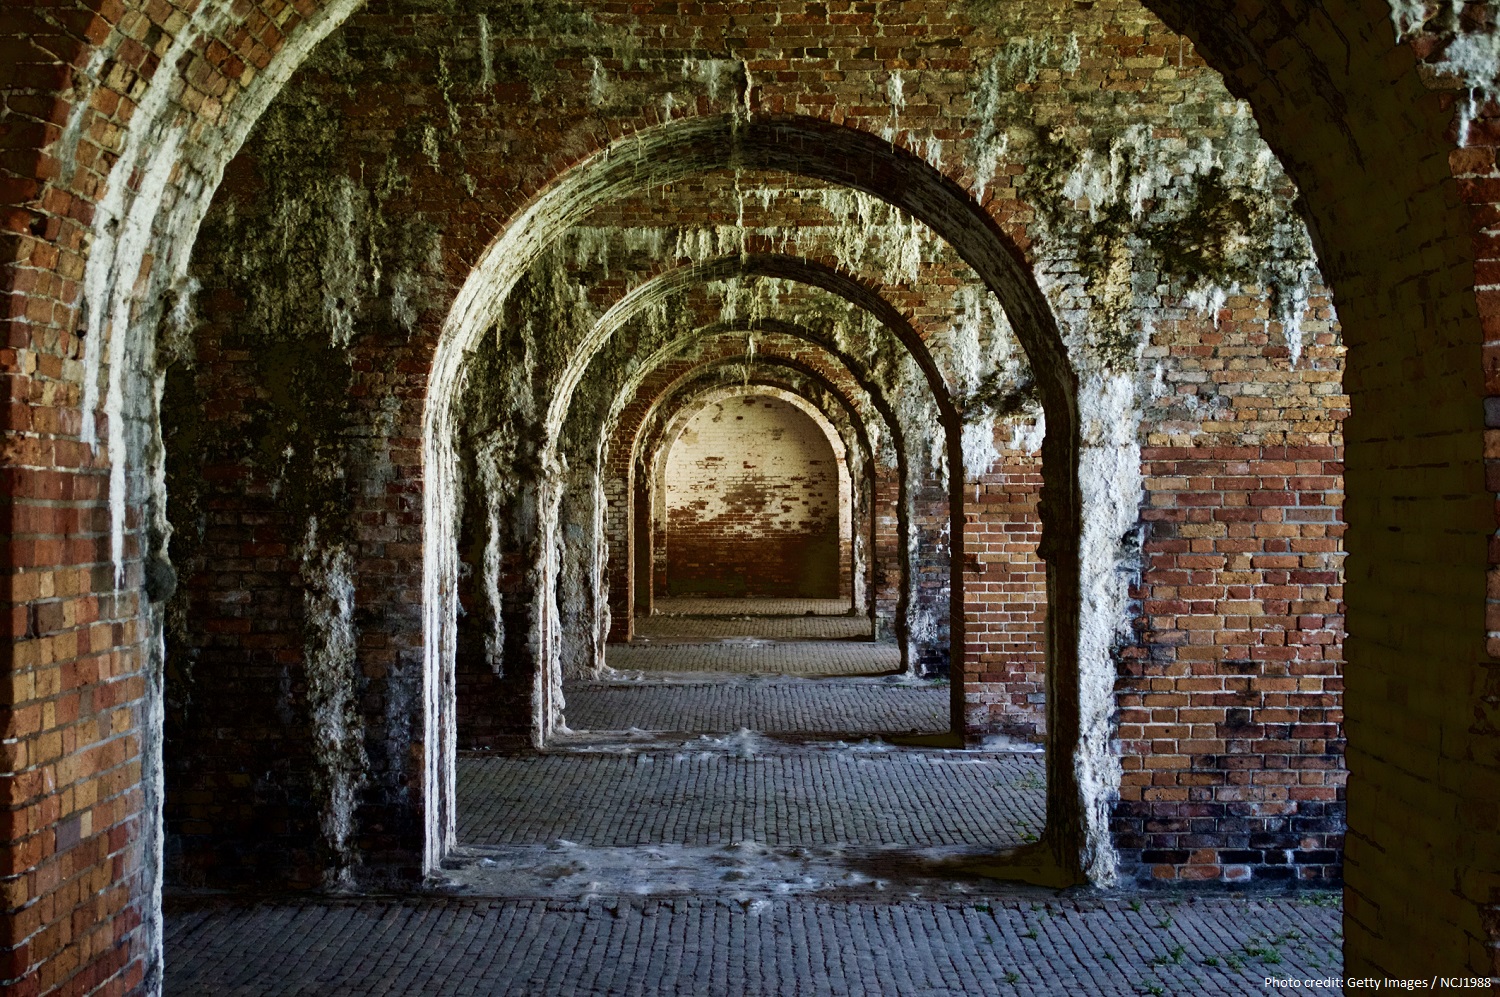 Spend an afternoon at Fort Morgan in Gulf Shores, AL!